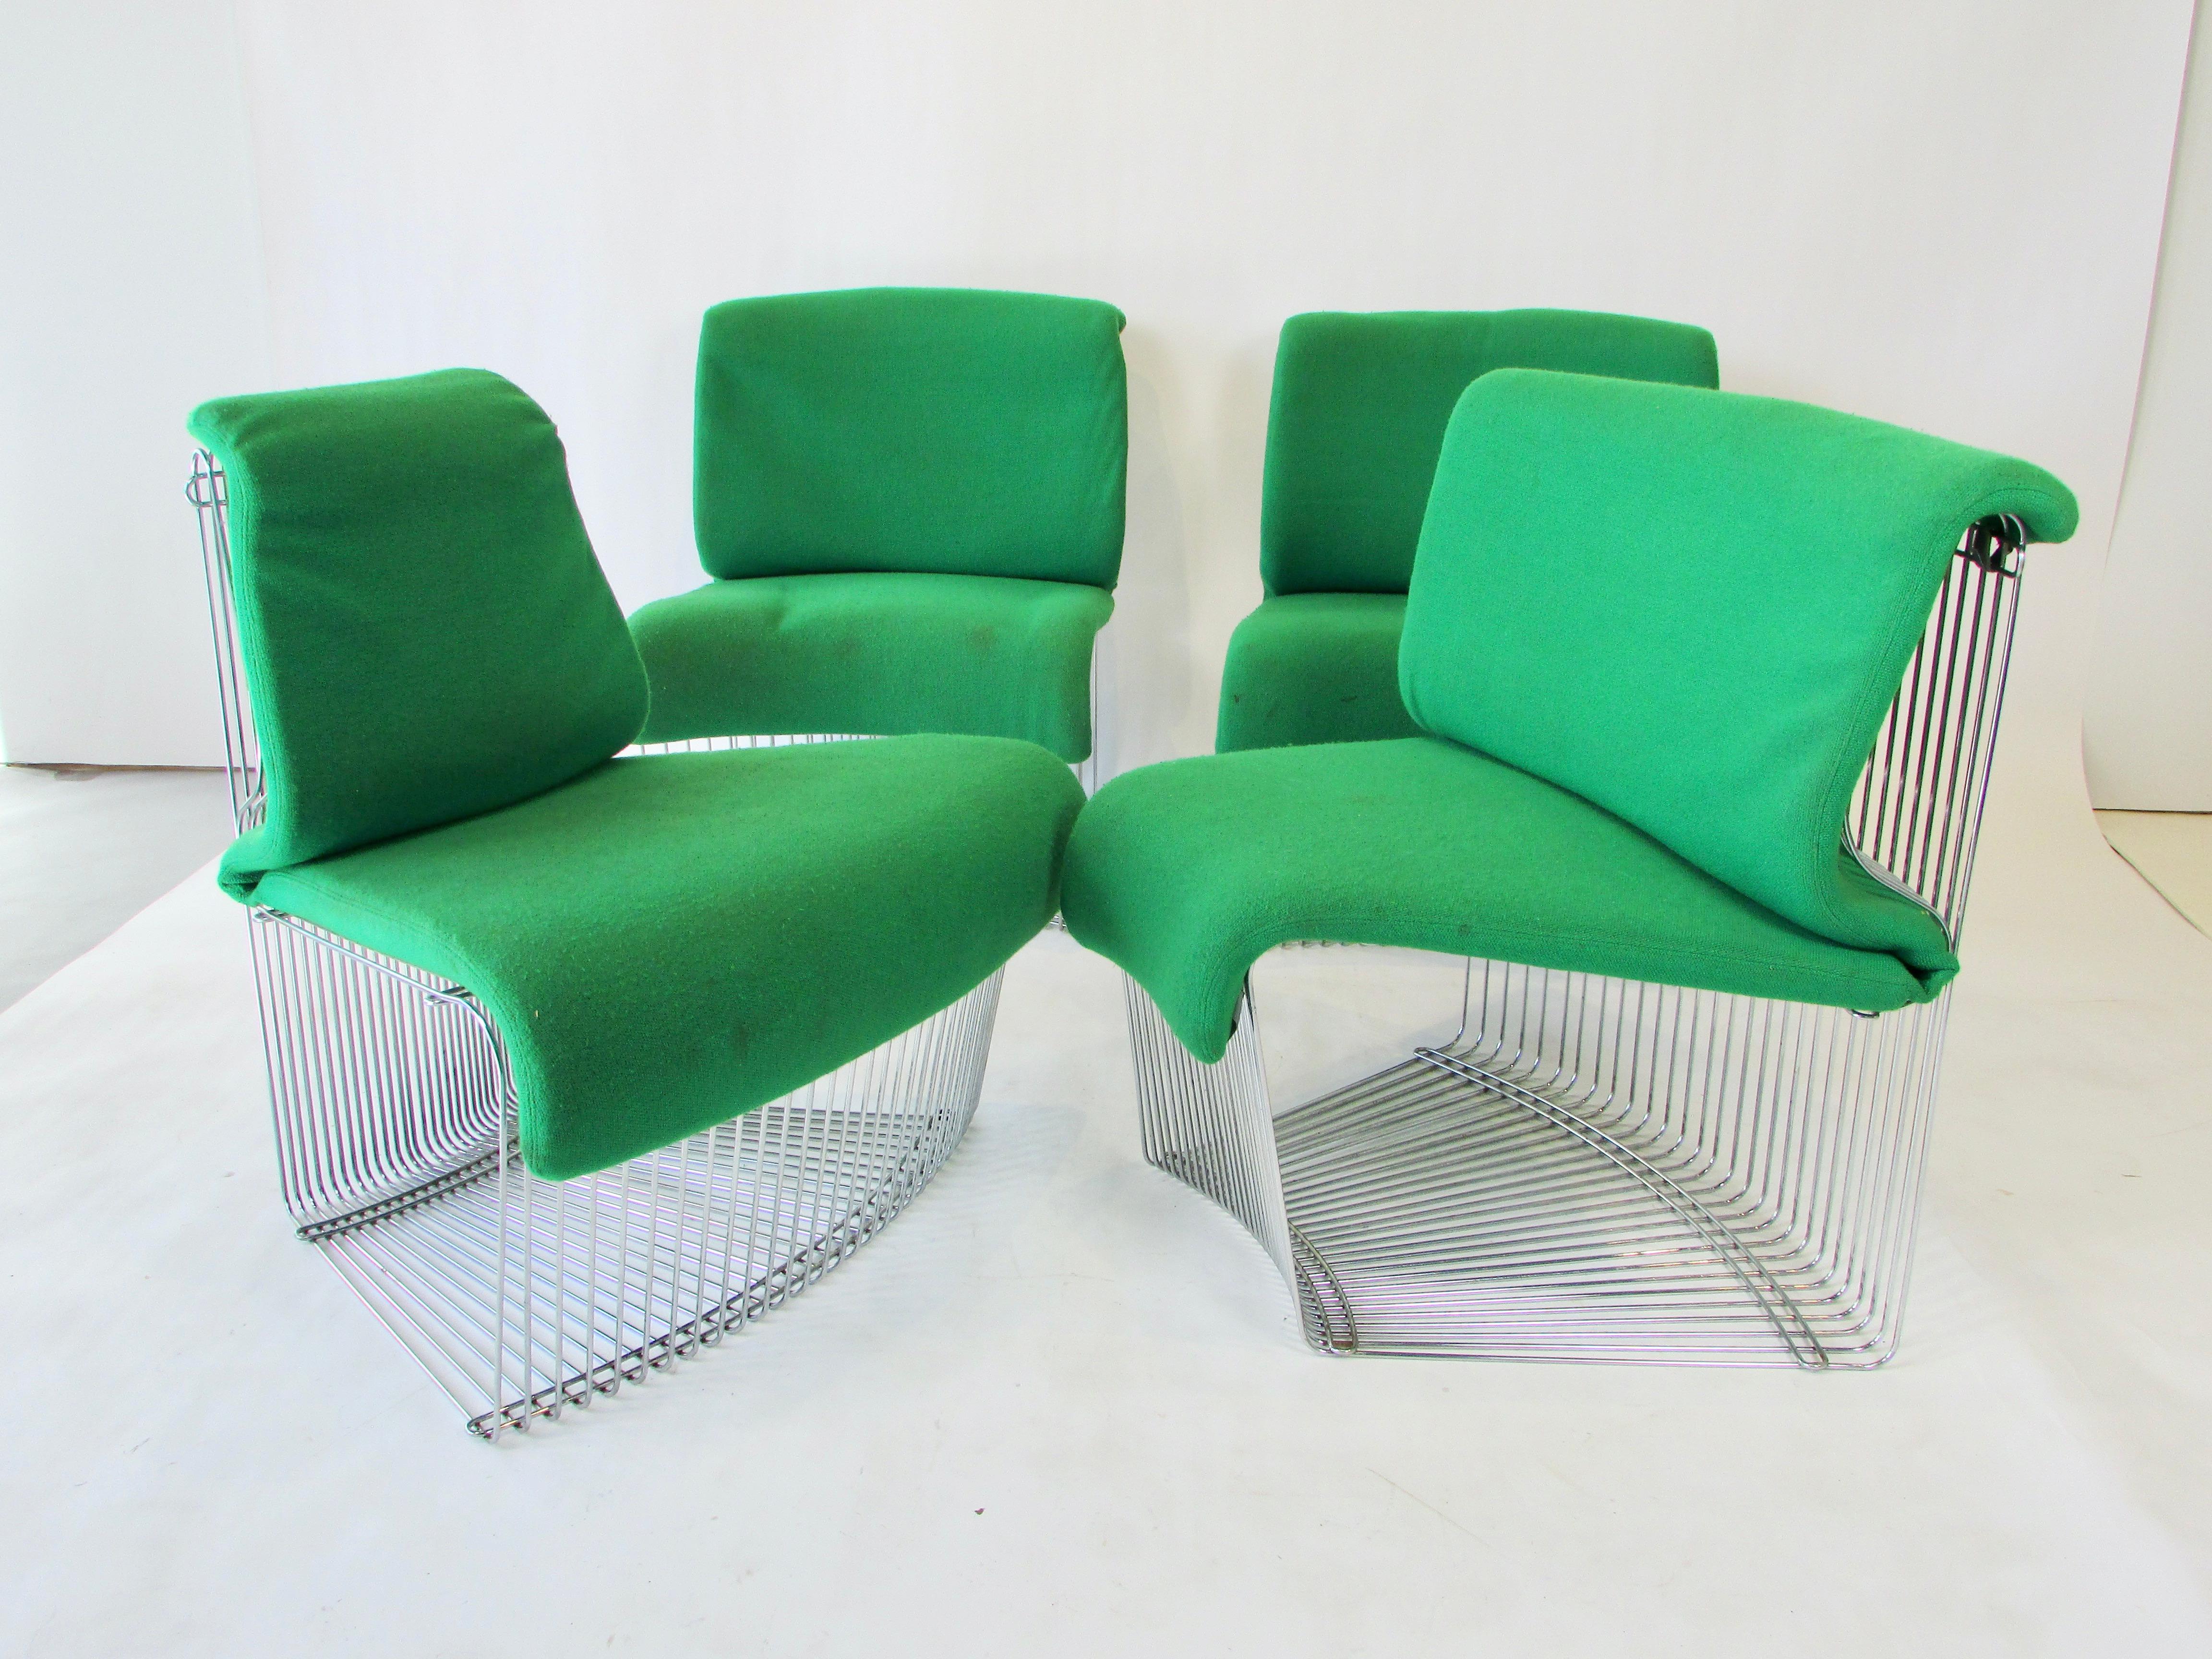 Roger Moore-era James Bond classic Verner Panton Pantonova system seating . Modular grouping of six pieces . One convex one concave two straight chairs and pair of ottomans or side tables . Modular Panton system can be arranged in multiple ways .